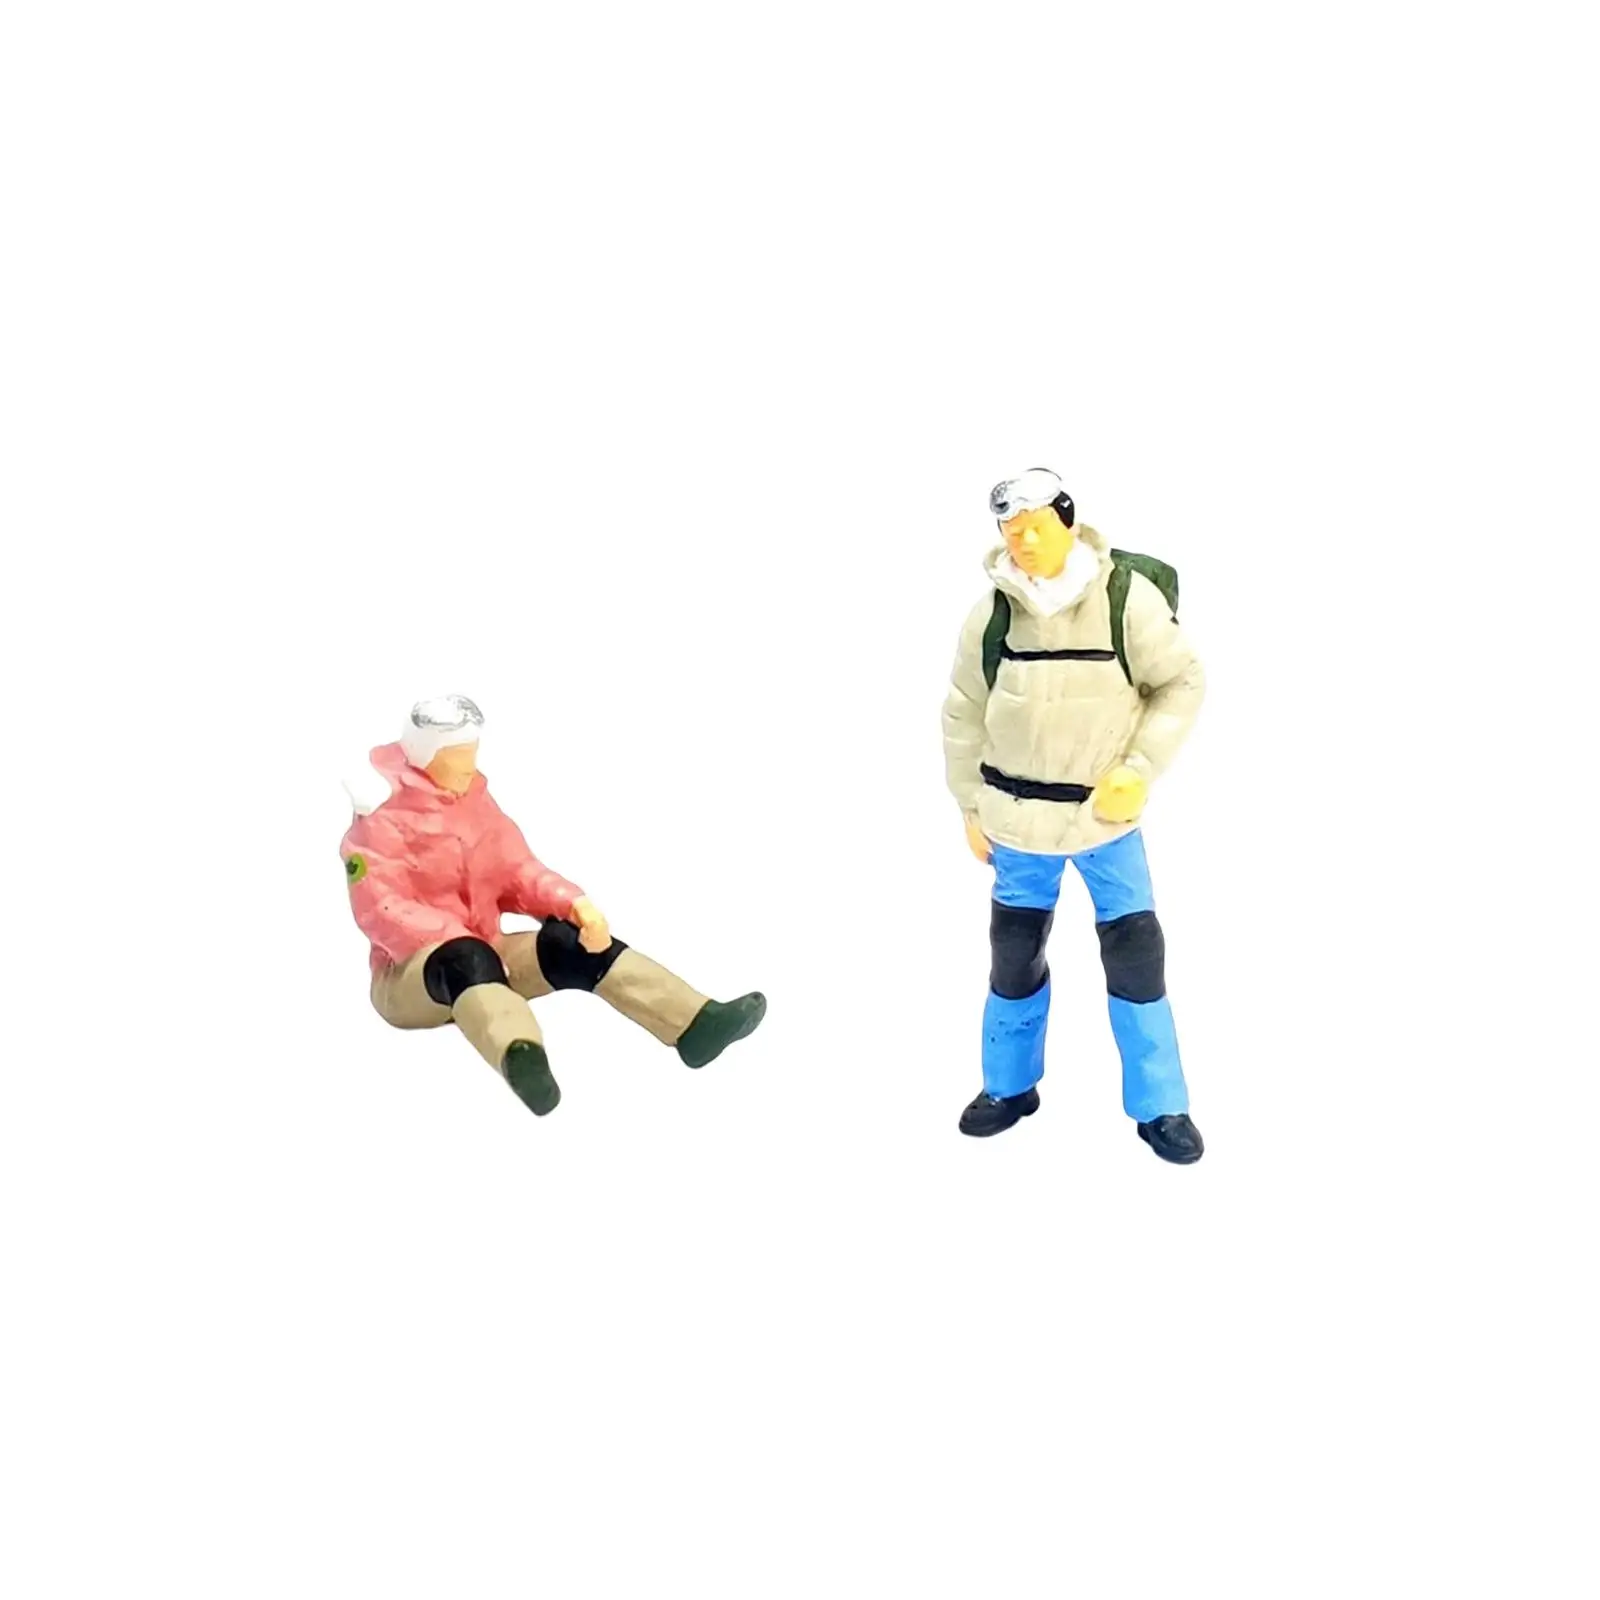 2x 1/87 Climbing People Figurines Sitting Standing Model Role Play Figure Mounting Miniature Scene People for Miniature Scene